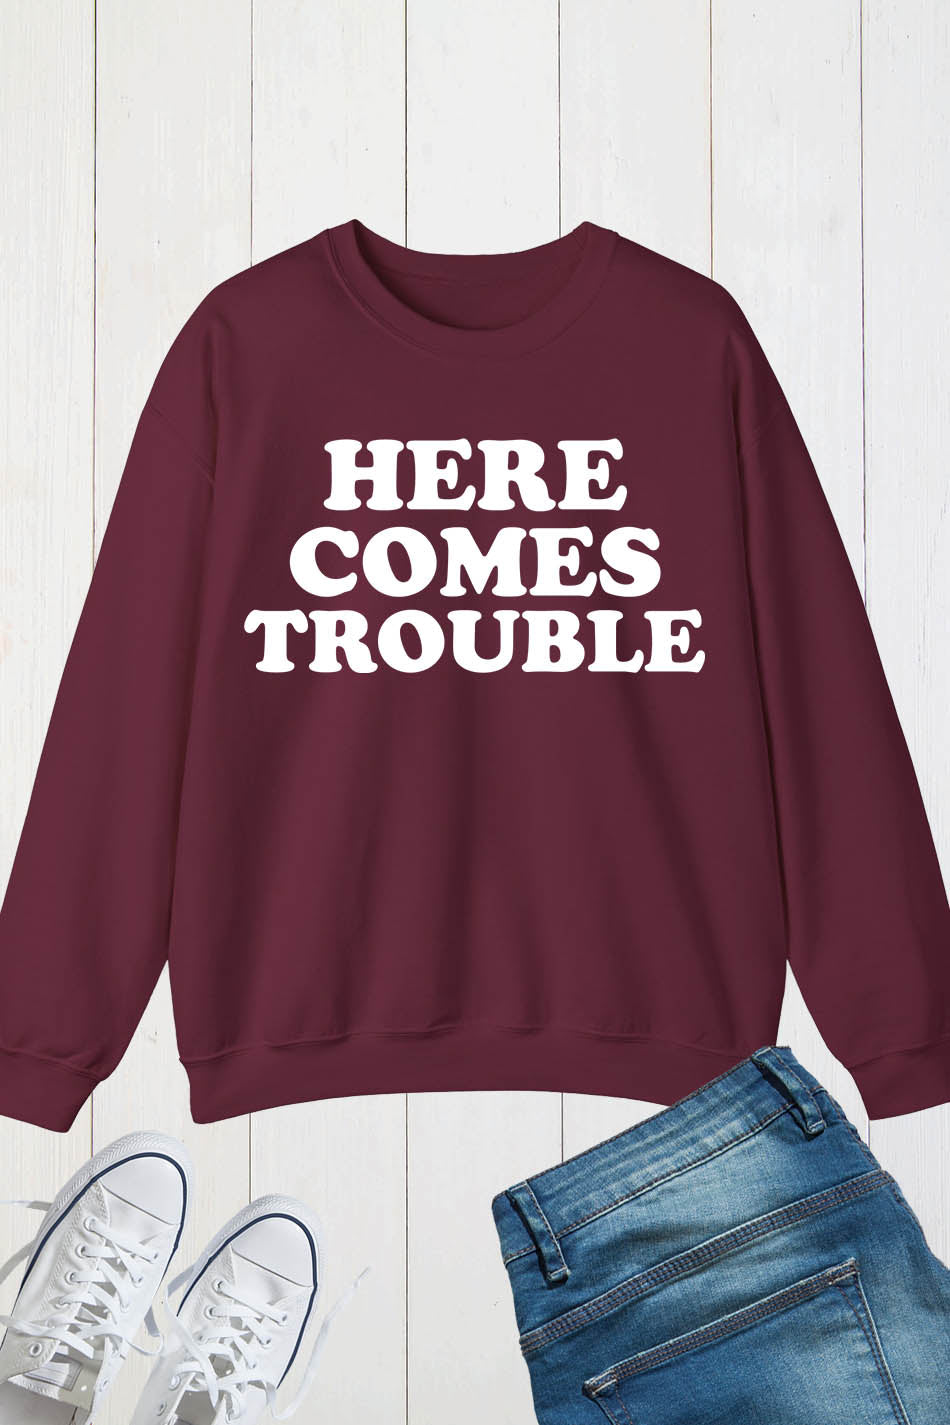 Here Comes Trouble Funny Sweatshirt